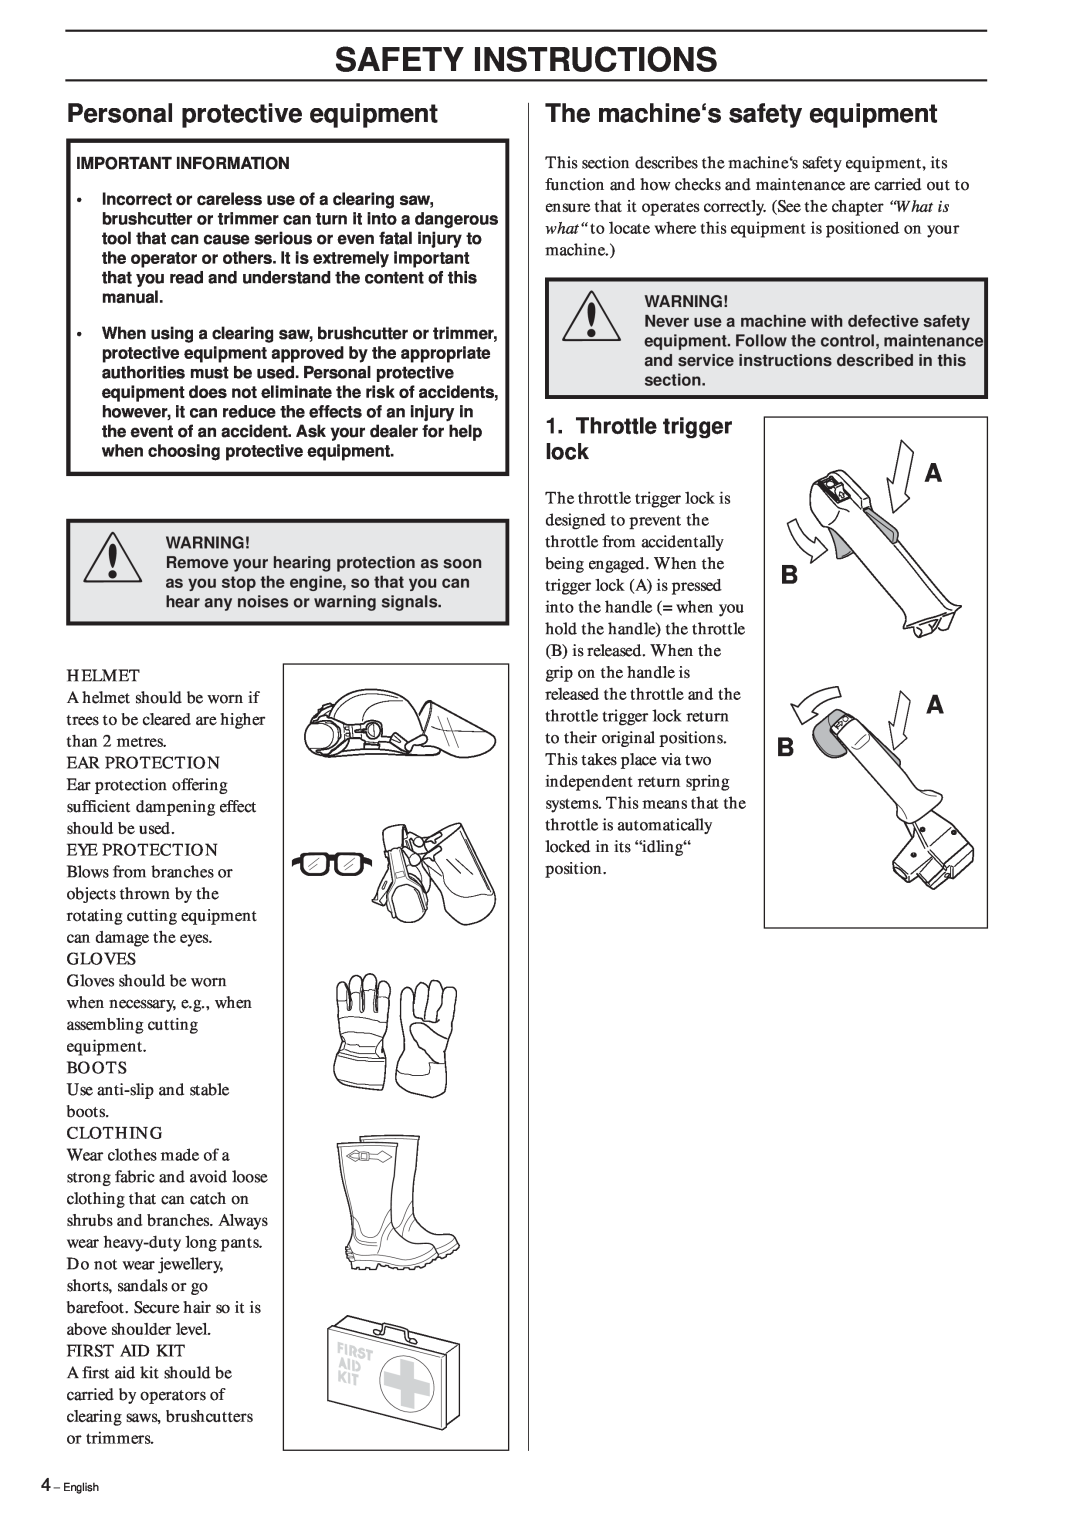 Husqvarna 322R Safety Instructions, Personal protective equipment, The machine‘s safety equipment, Throttle trigger lock 